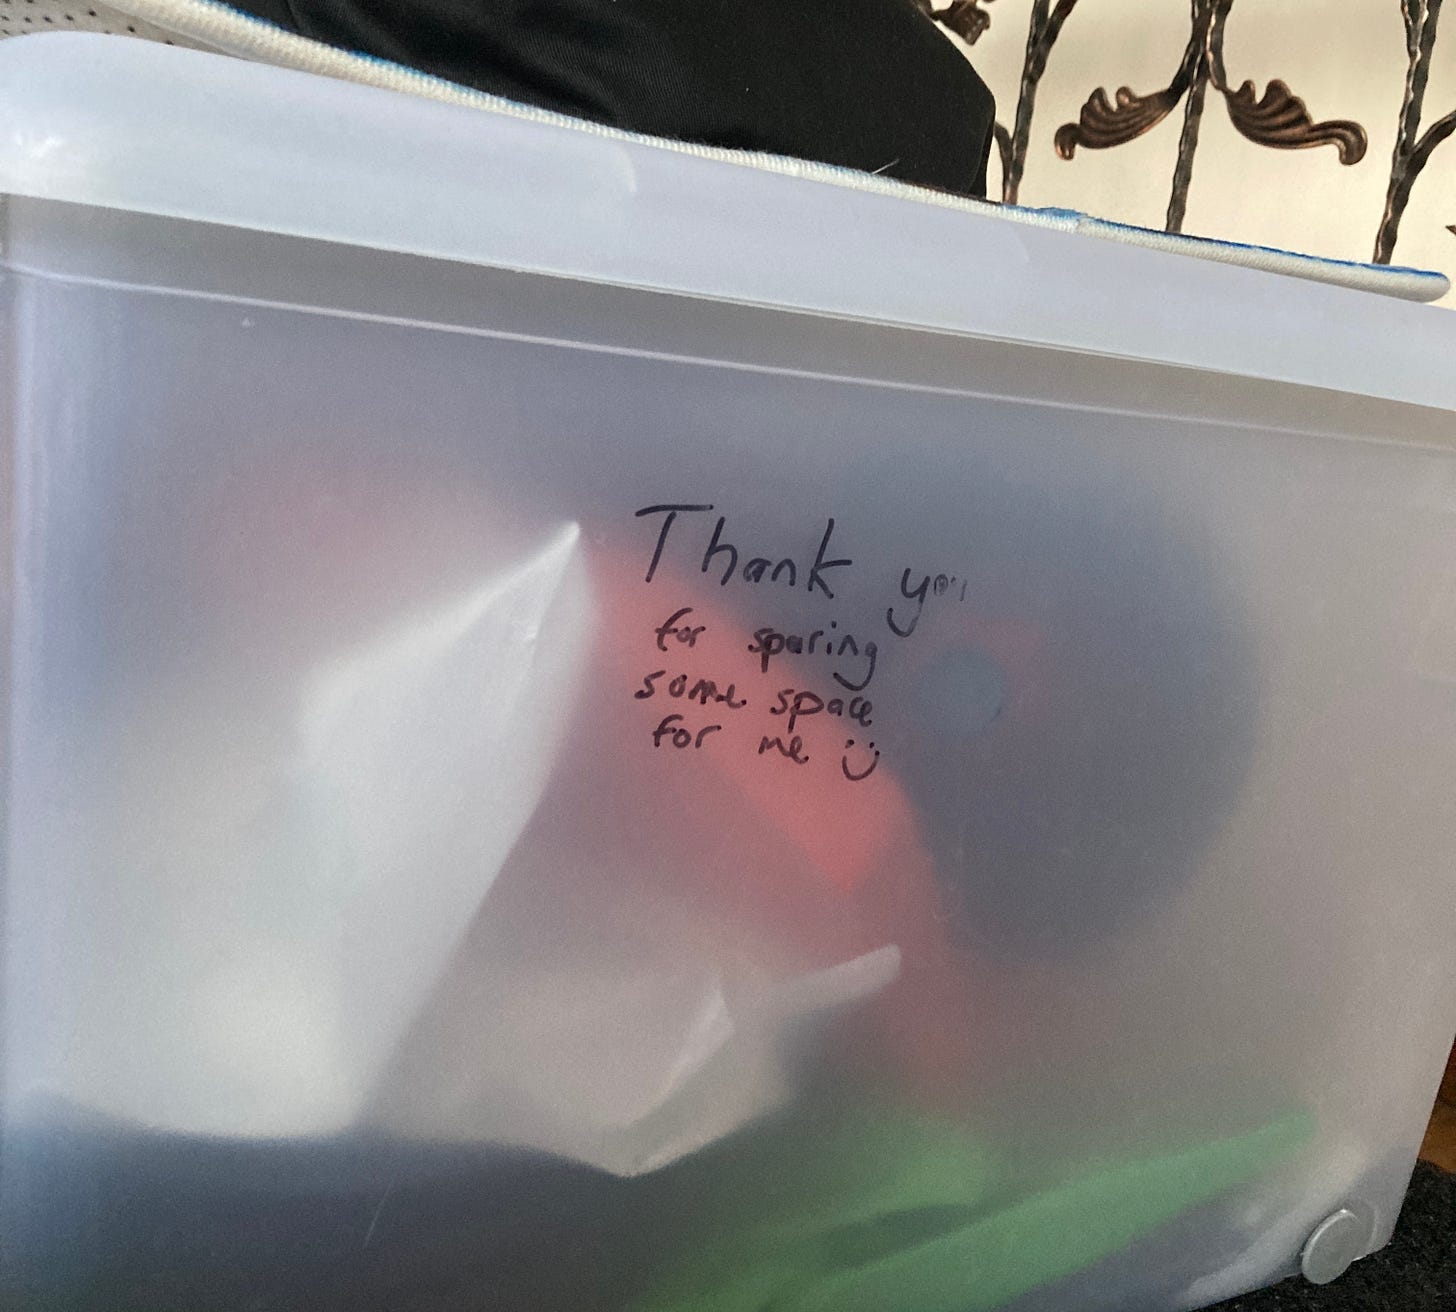 a plastic bin with the following written in marker: "Thank you for sparing some space for me :)"